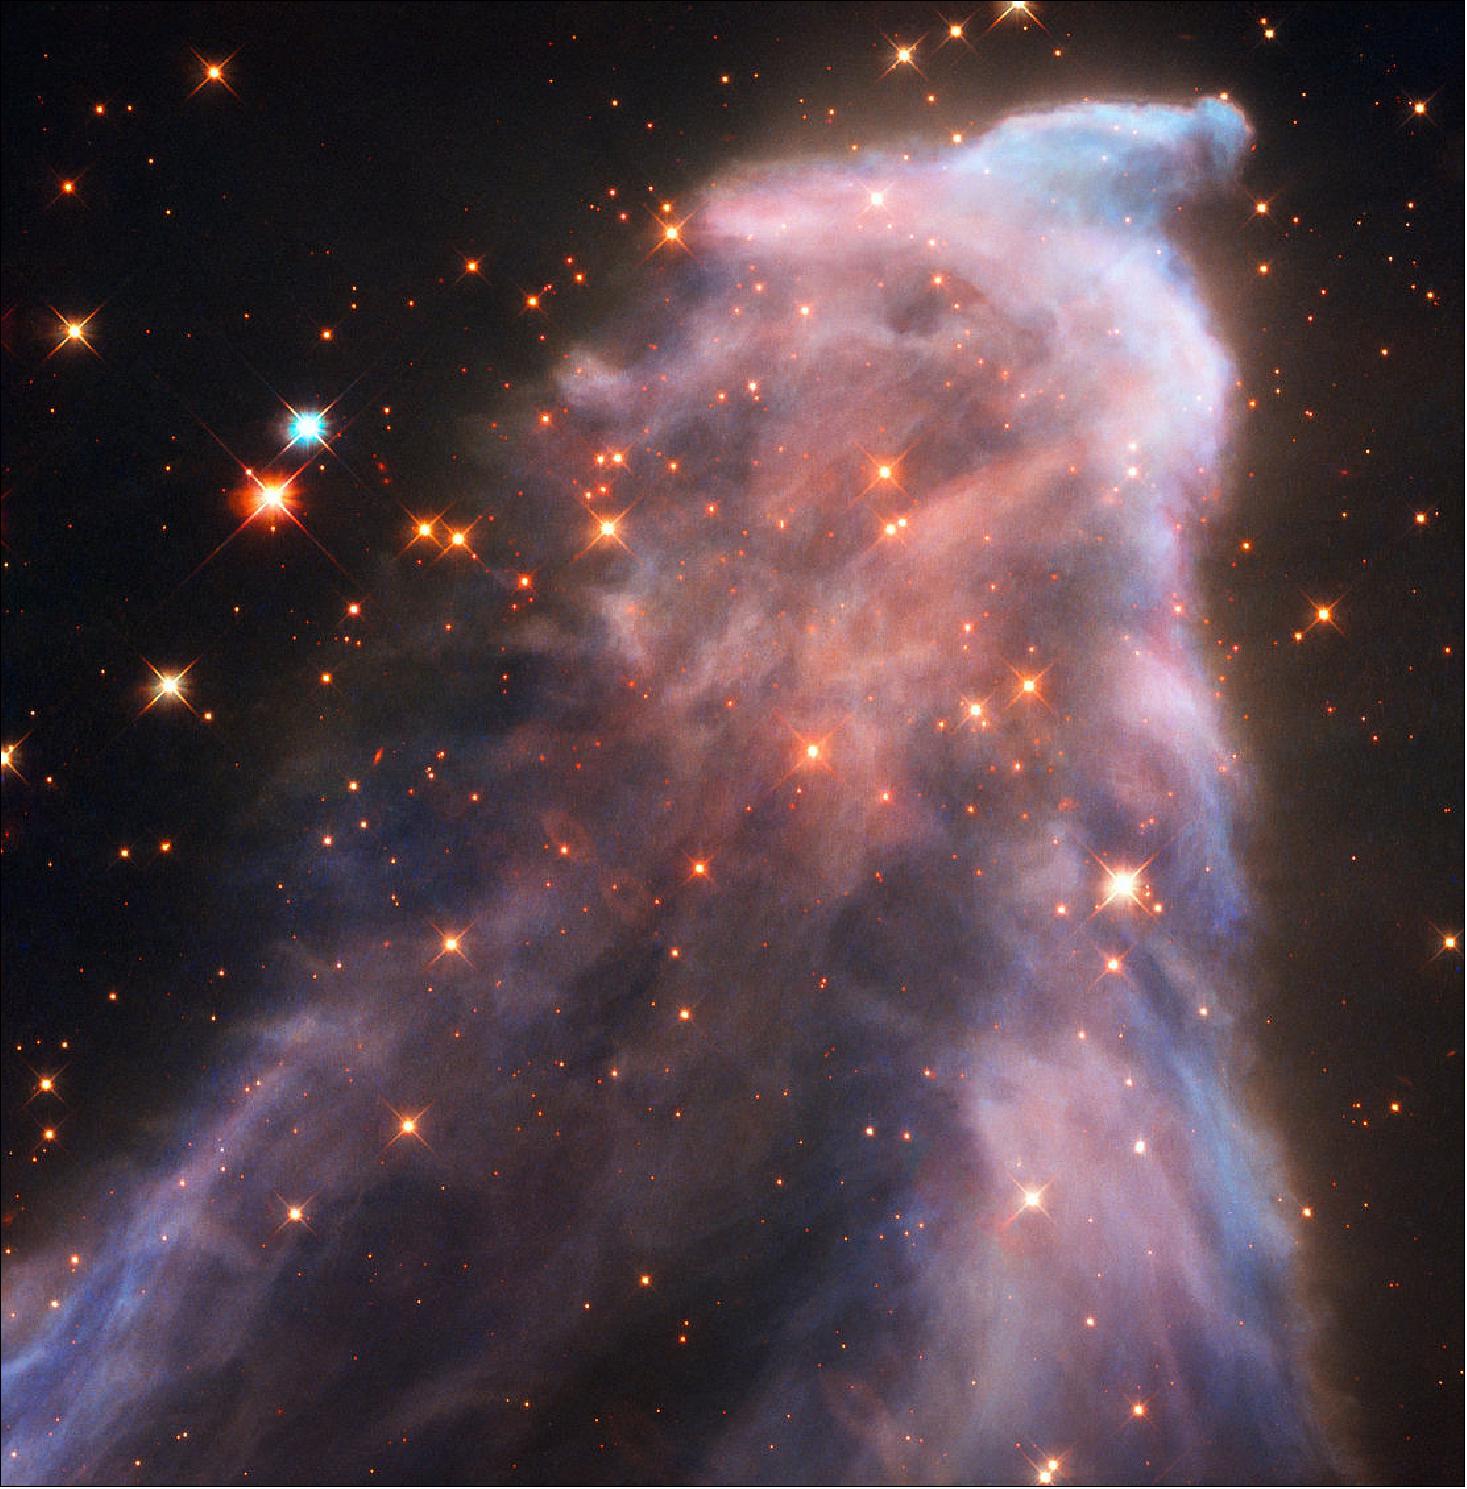 Figure 12: IC 63, the Ghost Nebula. From above Earth's atmosphere, Hubble gives us a view that we cannot hope to see with our eyes. This photo is possibly the most detailed image that has ever been taken of IC 63, and it beautifully showcases Hubble's capabilities (image credit: ESA/Hubble, NASA, CC BY 4.0)